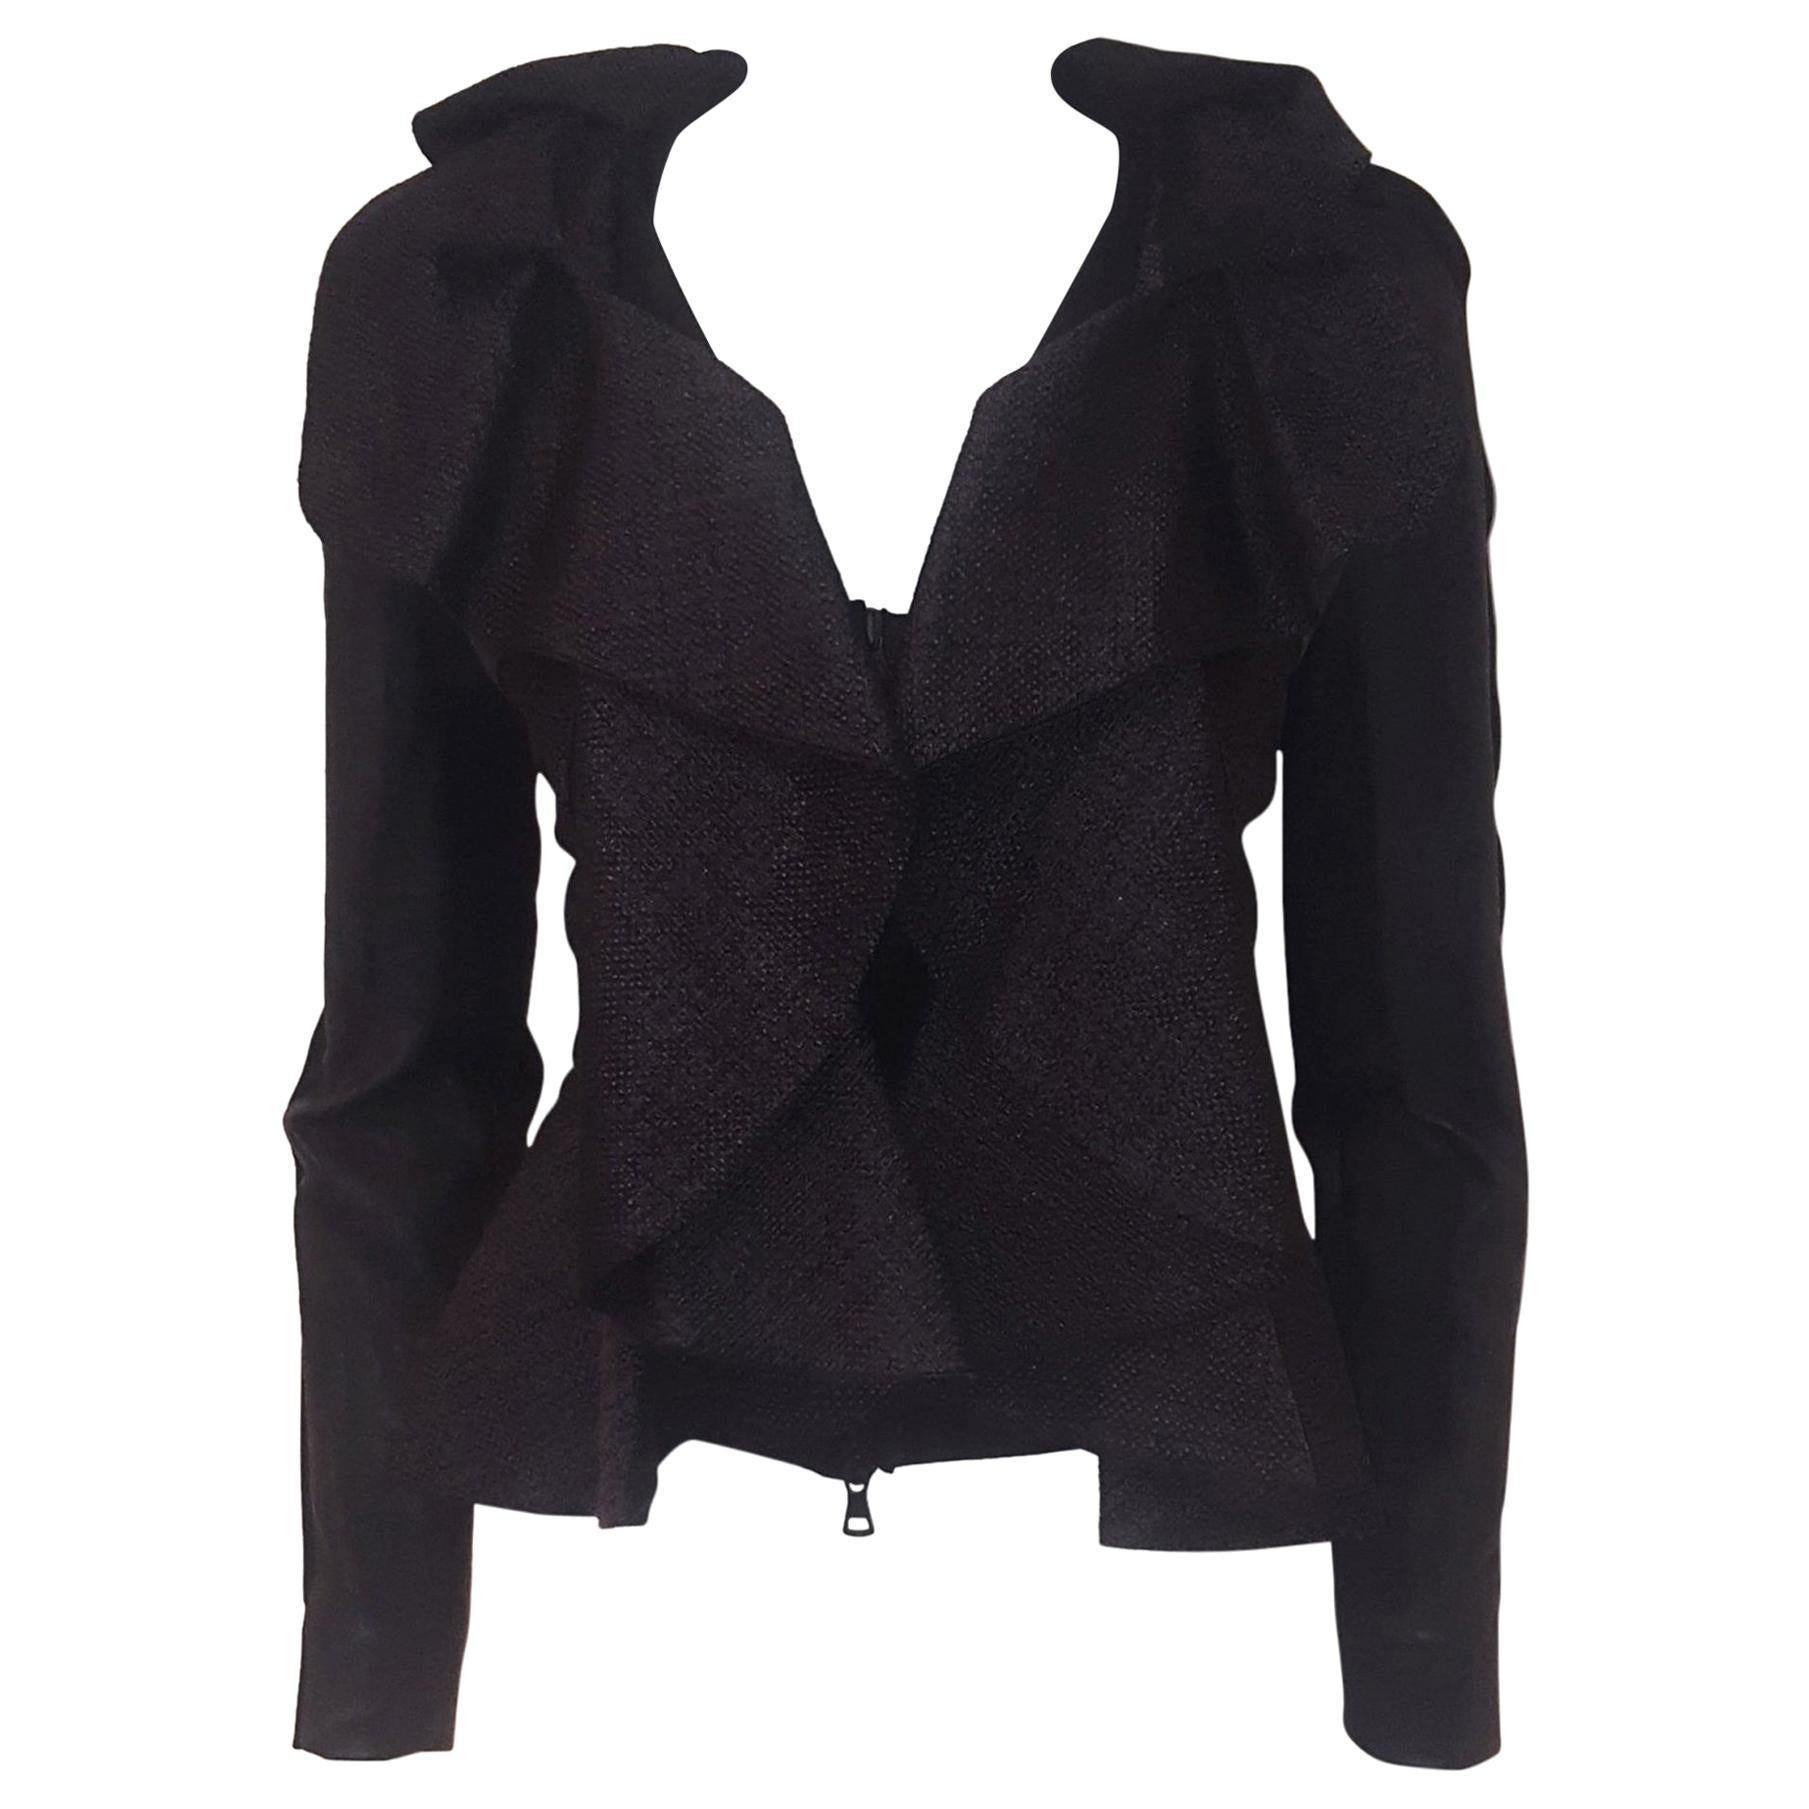 Valentino black wool and silk jacket features a tailored ruffle collar flowing down the front and around the hem of the jacket.  This expertly crafted jacket has a stark zipper and ruffles that have a textured woven look.  The long sleeves are soft